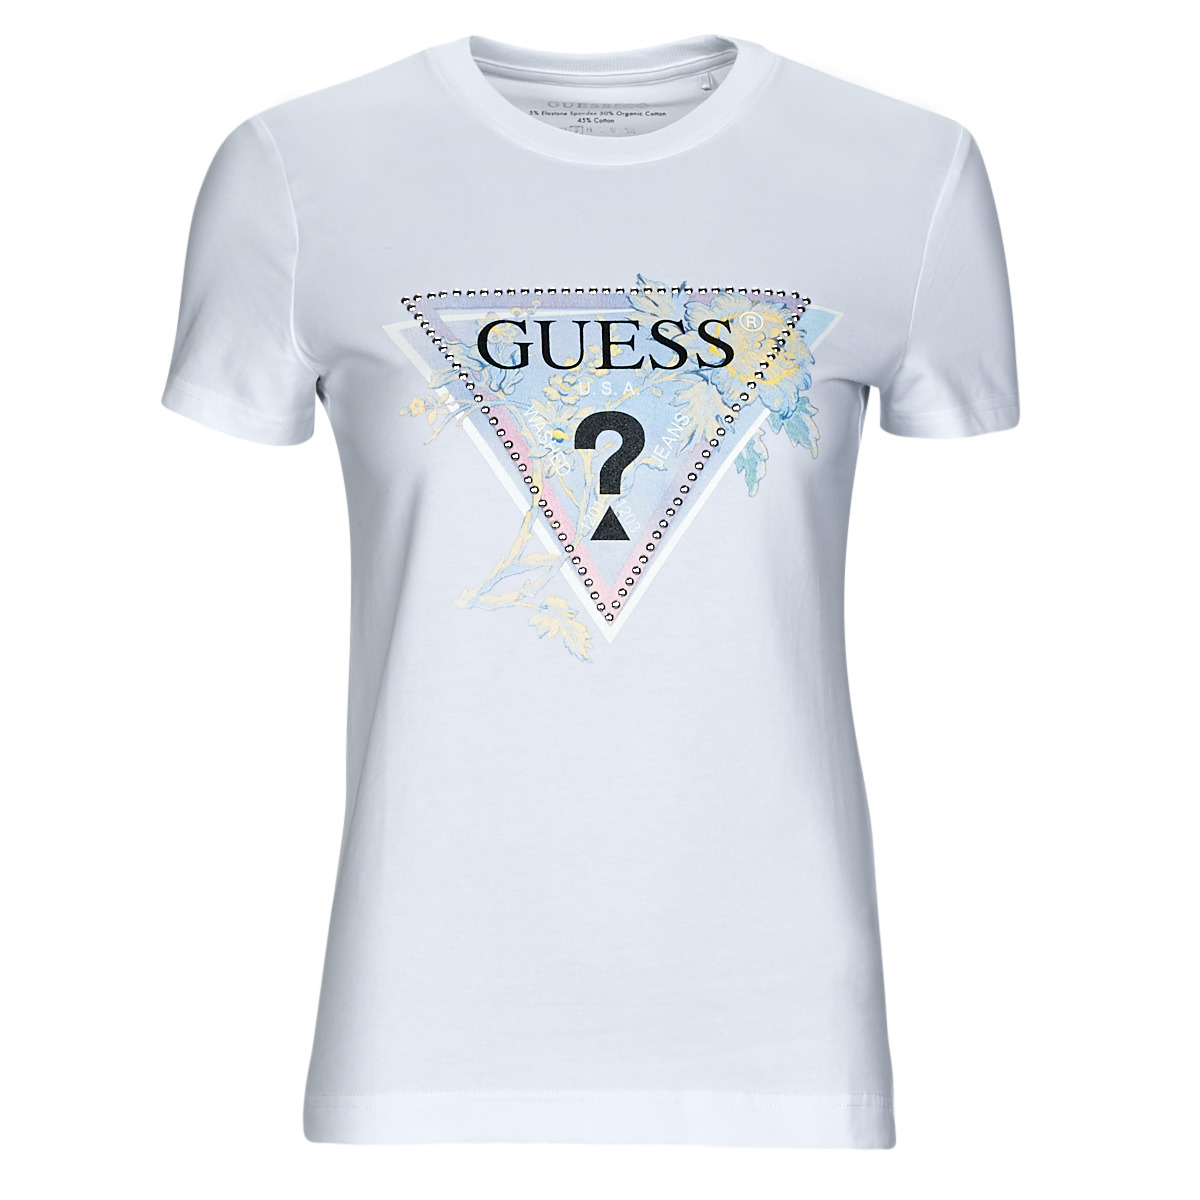 Textil Mulher shirts ET Polos Guess st10170 o775 taille SS CN ALVA TEE Branco